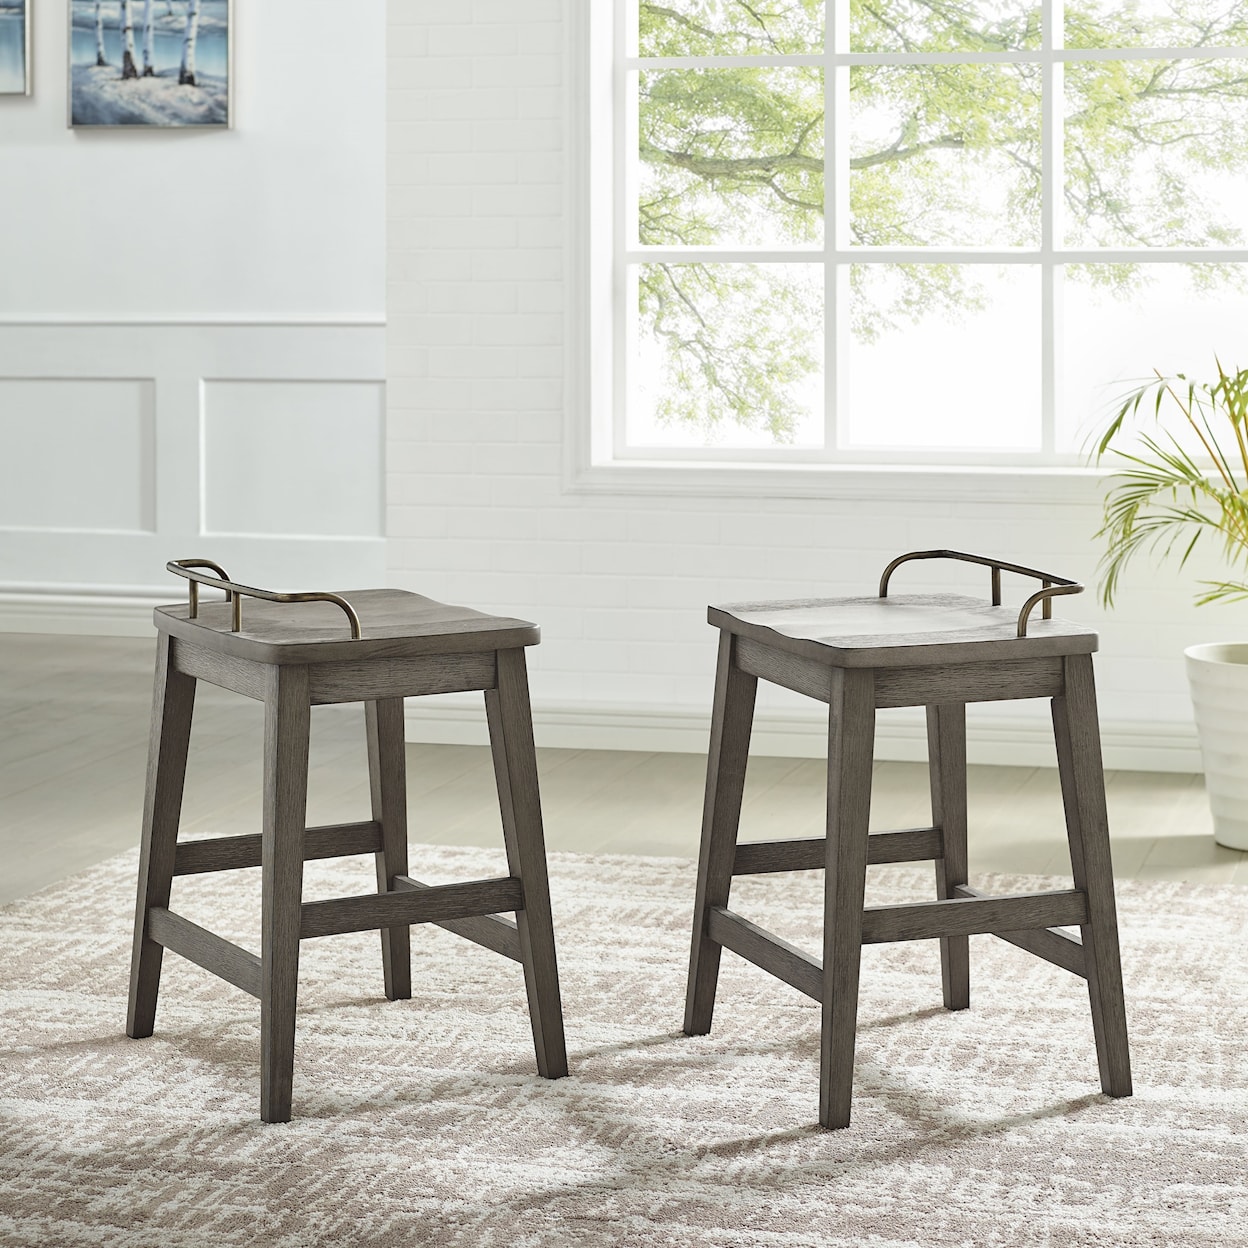 Steve Silver Ryan 7-Piece Counter Height Table and Stool Set